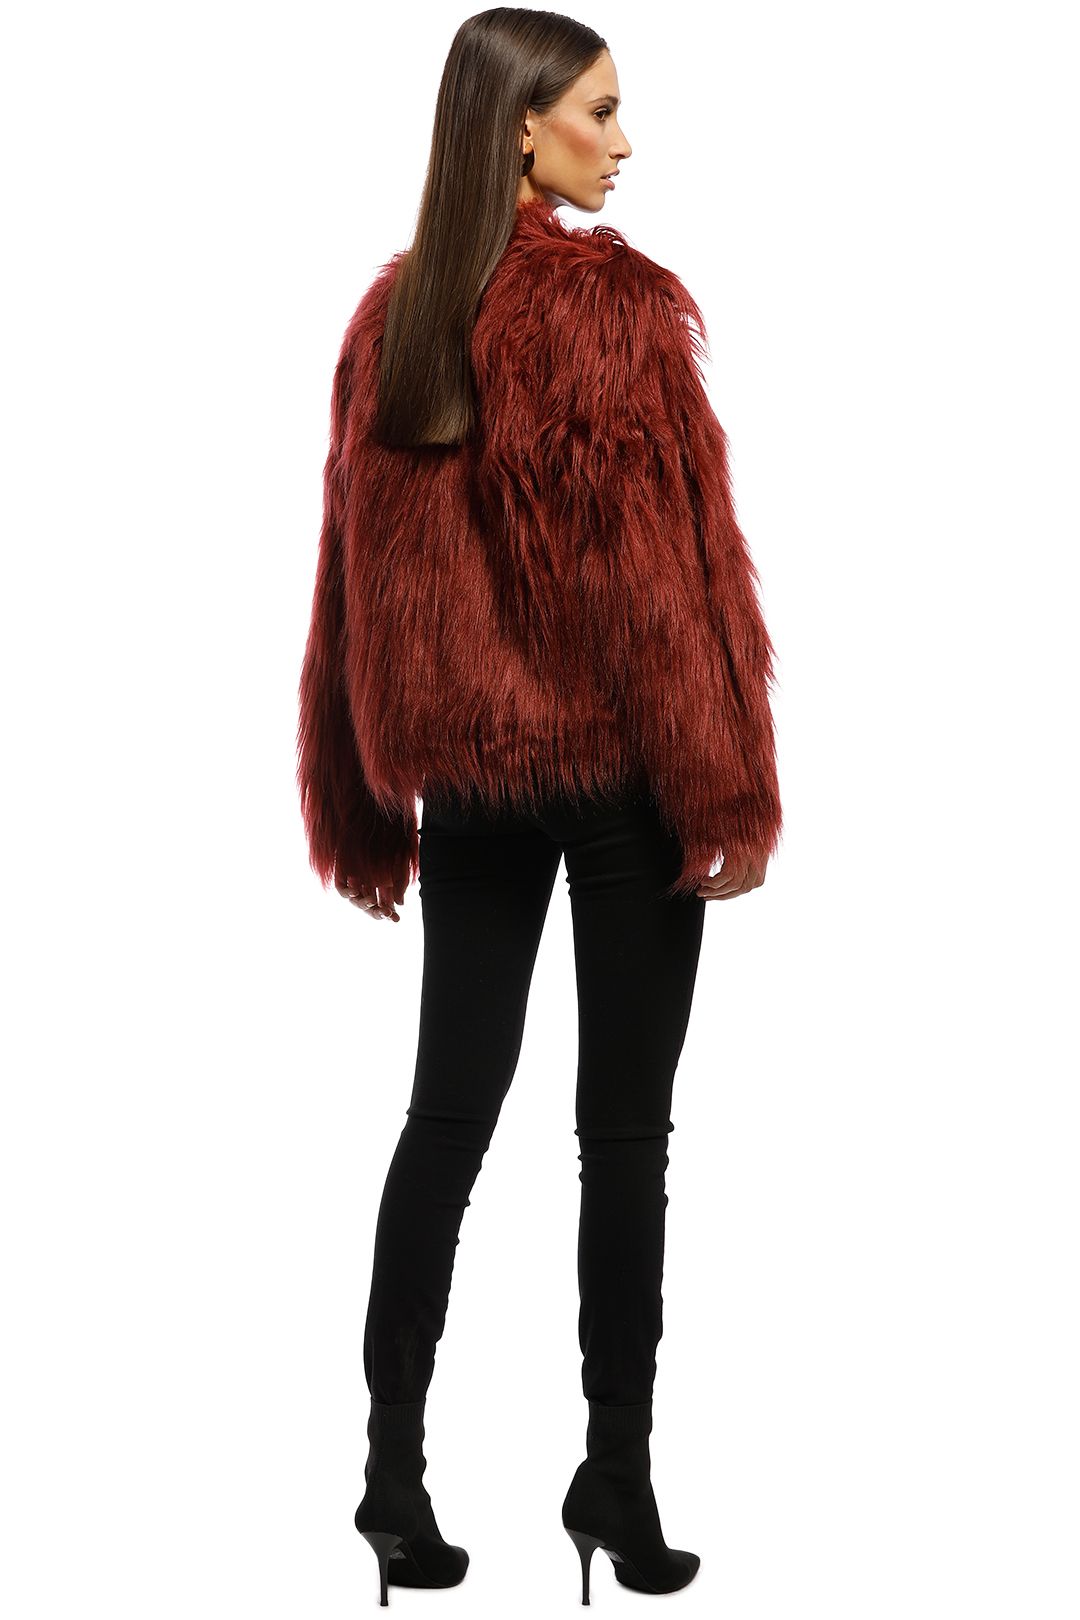 Everly - Marmont Faux Fur Jacket - Wine - Back